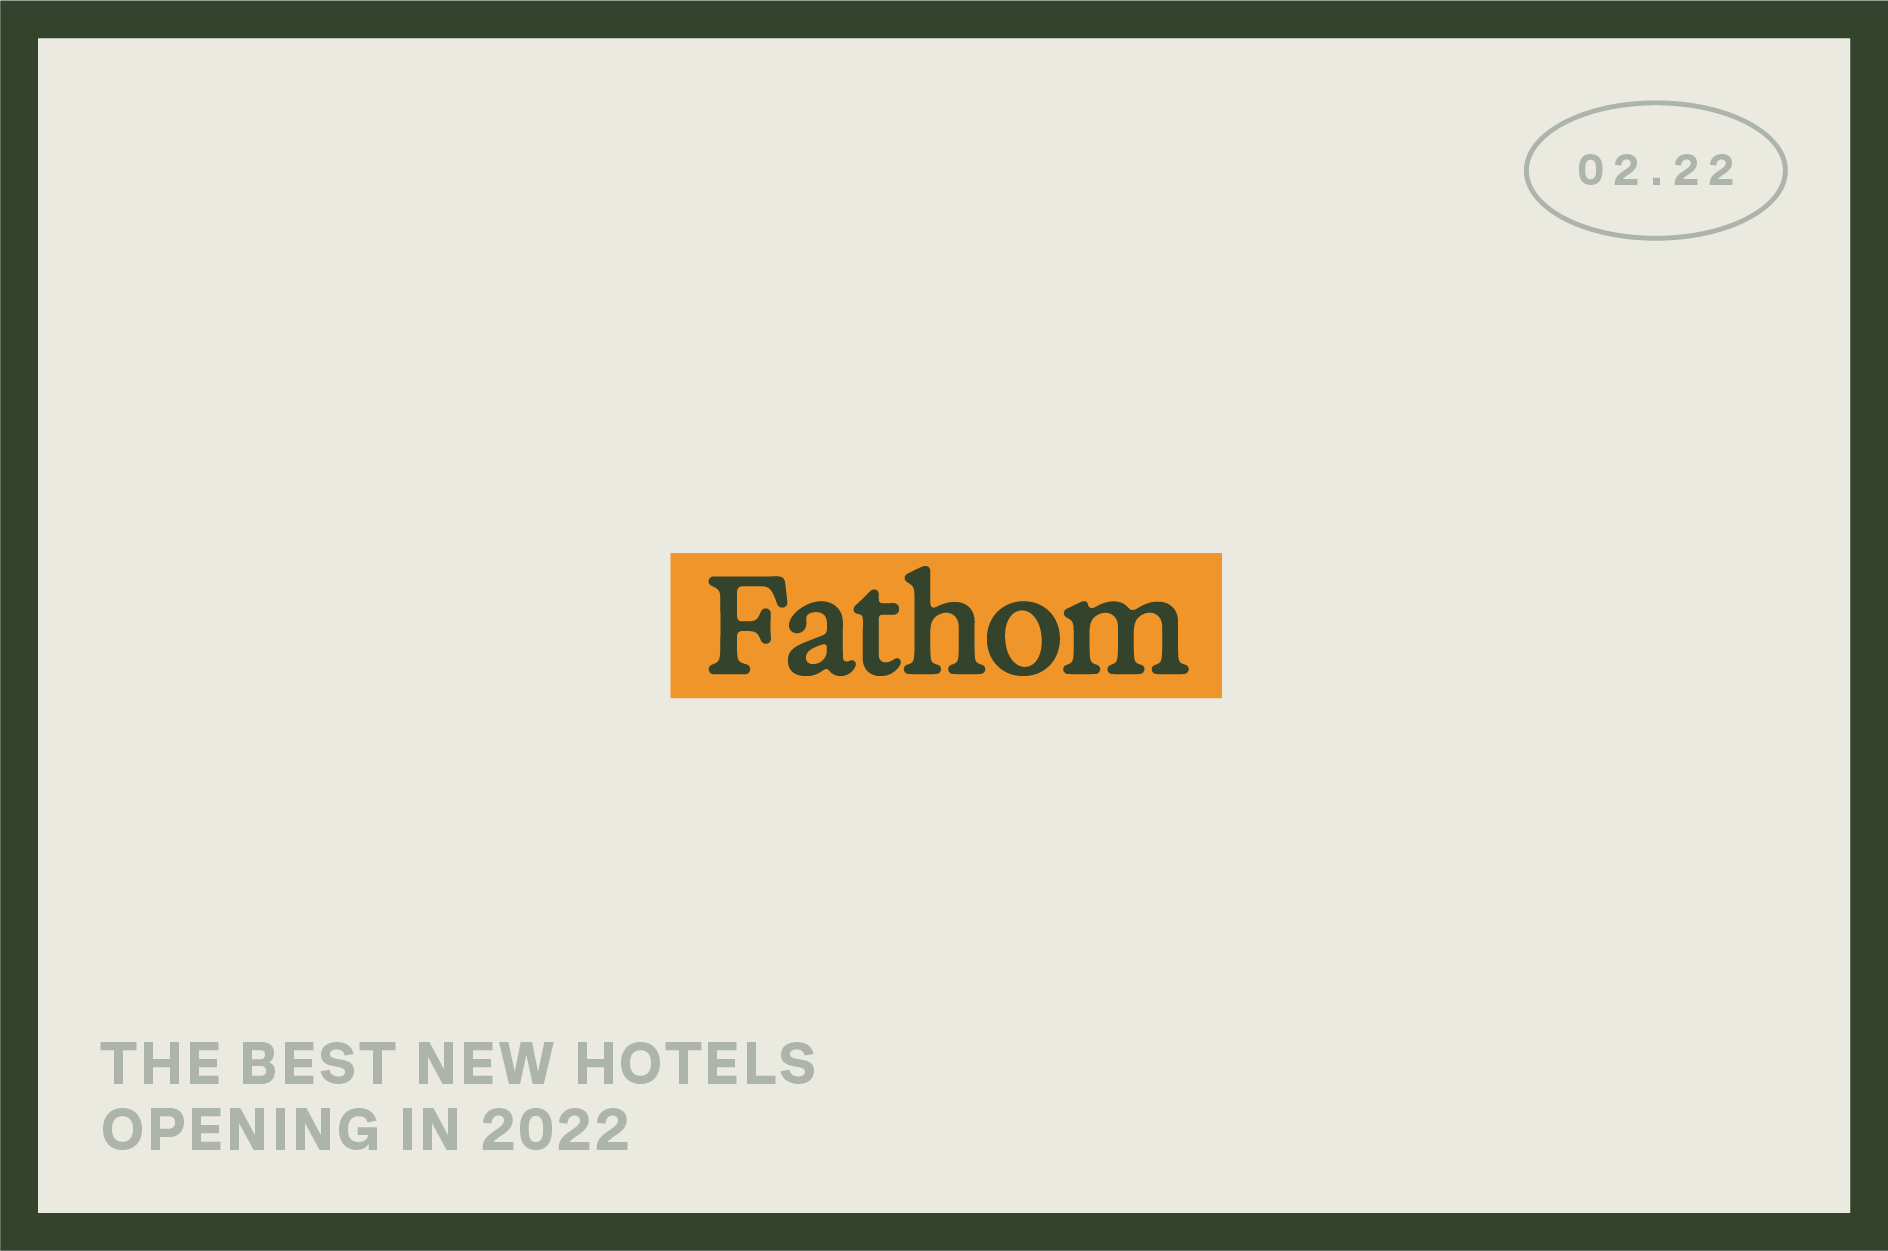 The "Fathom" banner features "The best new hotels opening in 2022" in enticing lines.